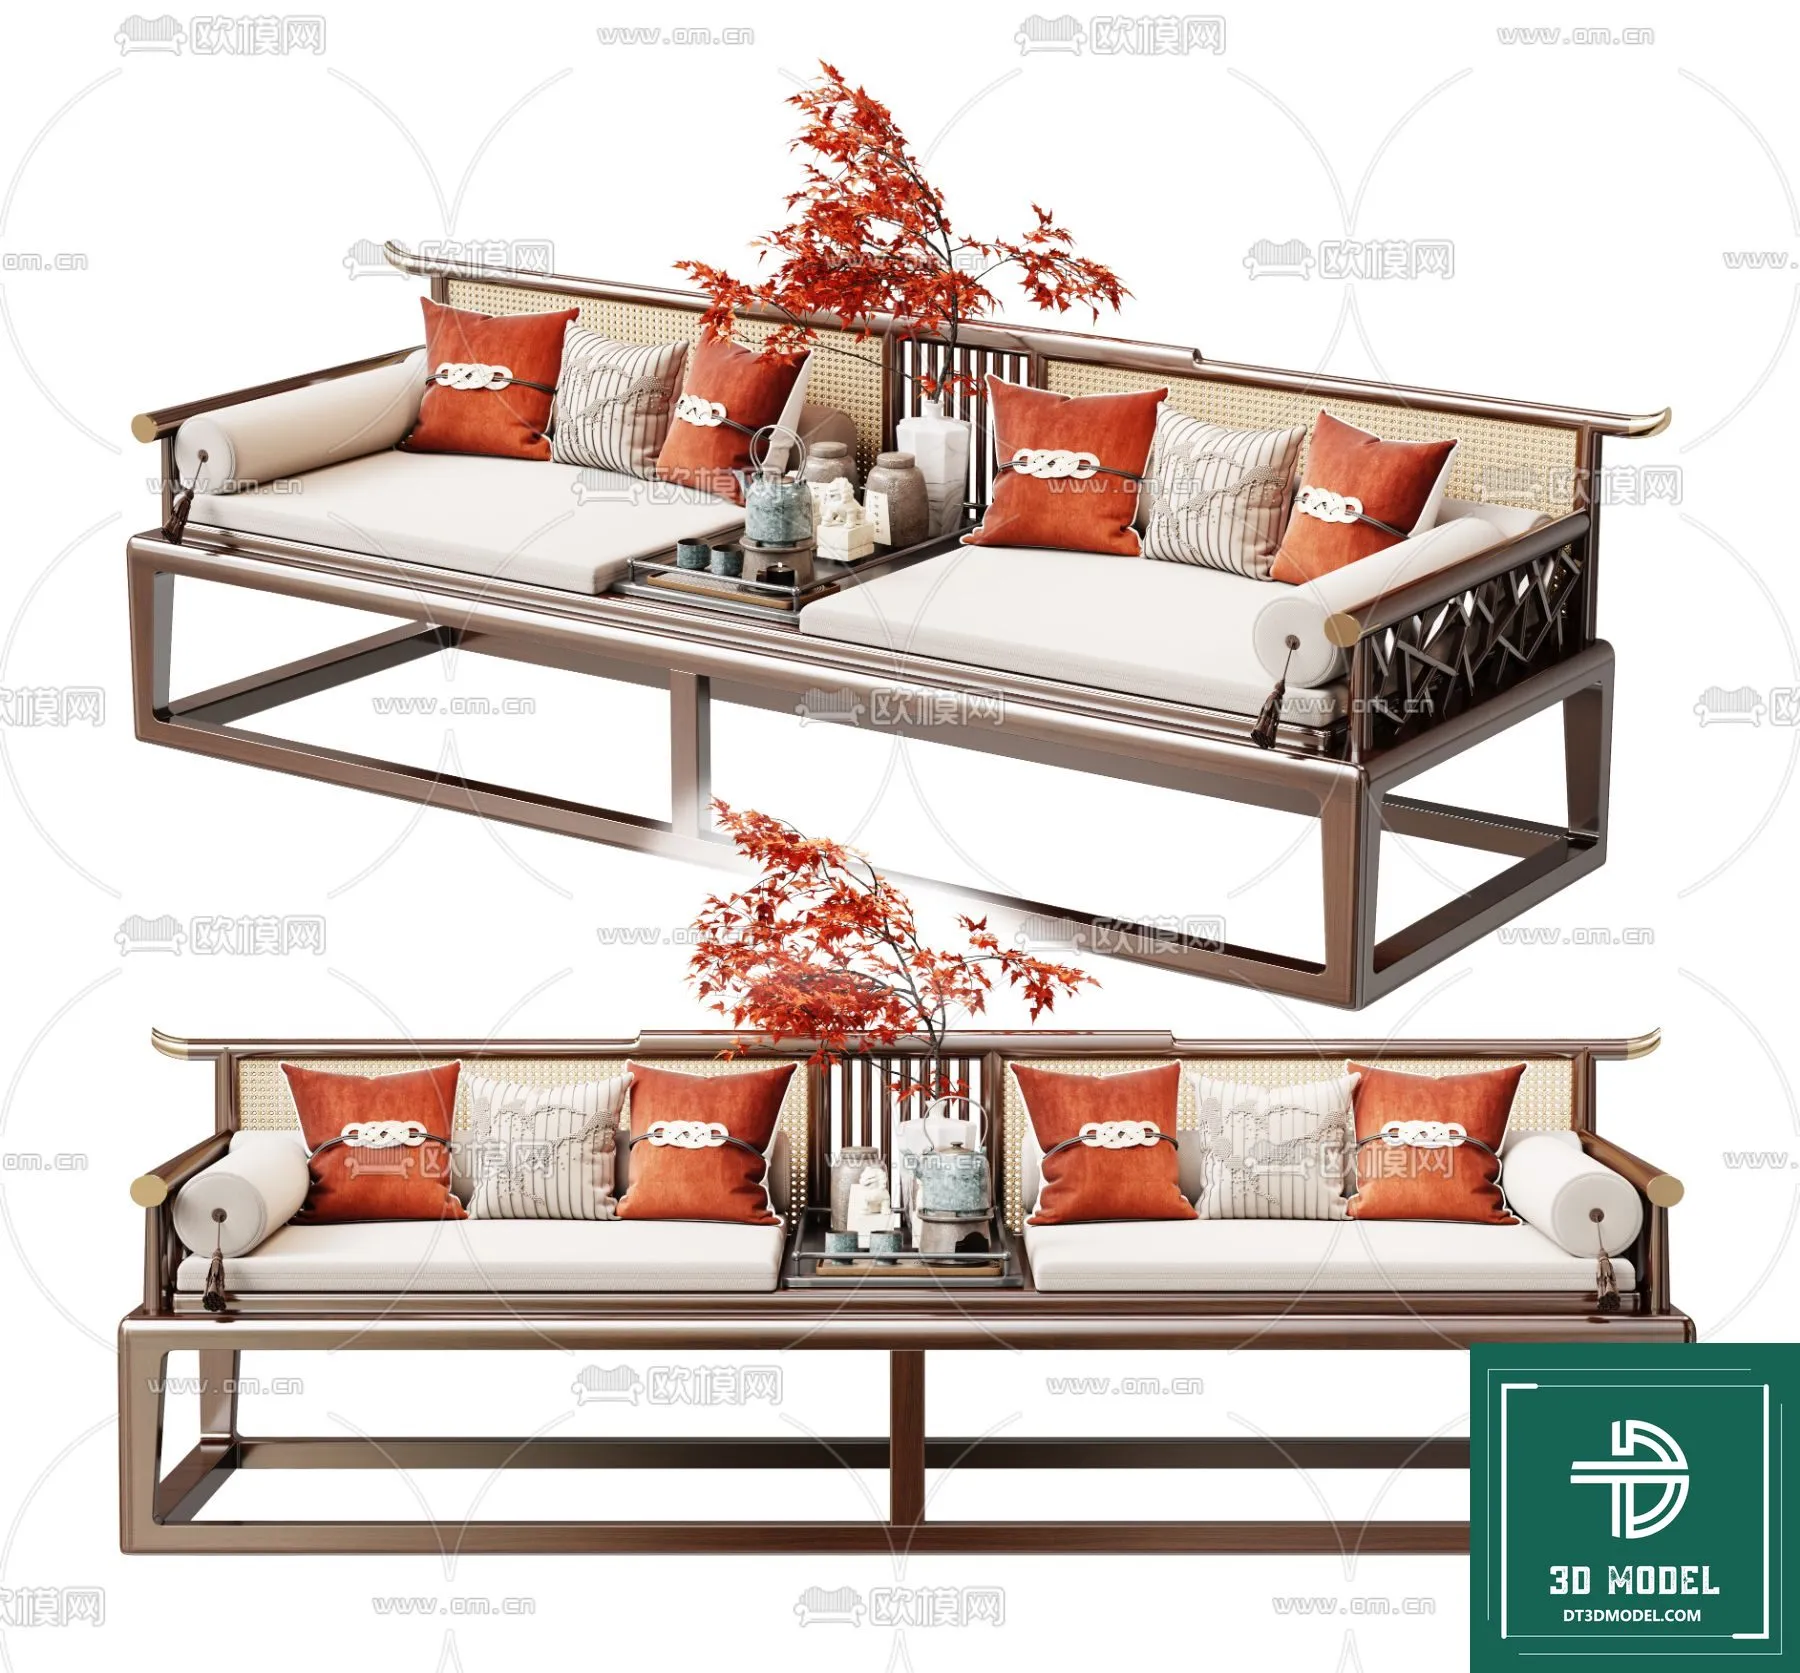 INDOCHINE STYLE – 3D MODELS – 835